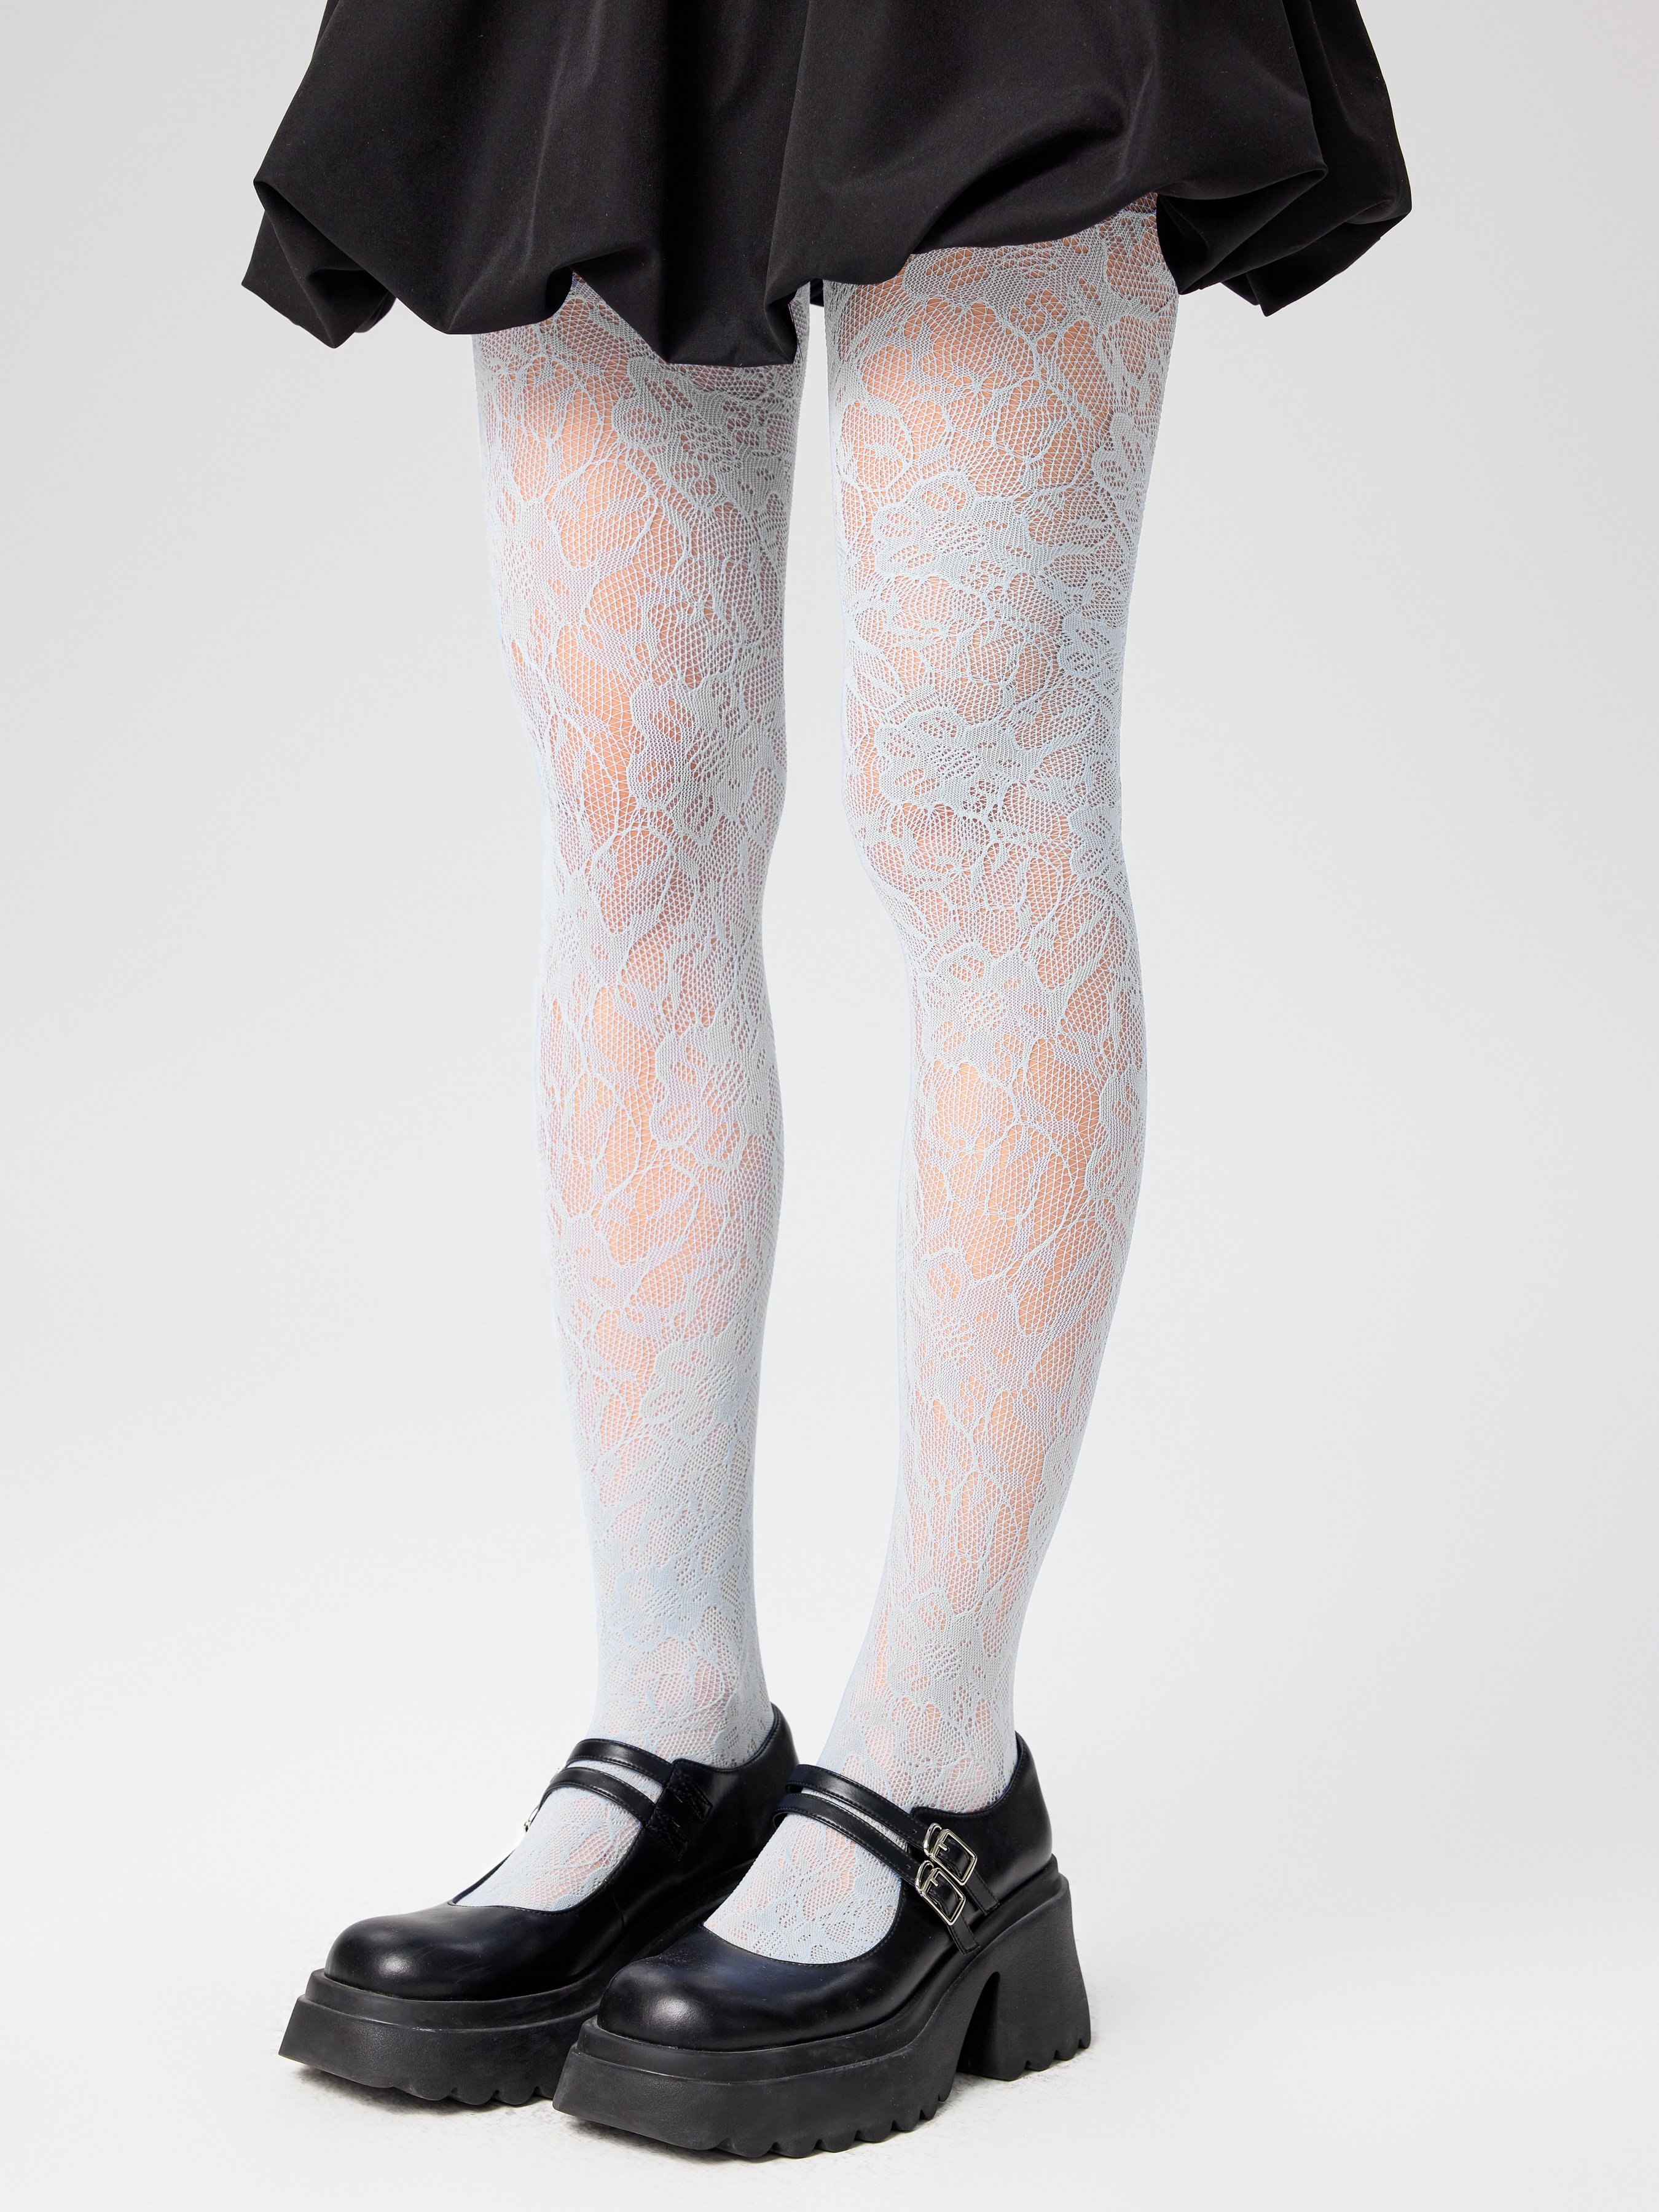 Perazecry - Floral Lace Tights